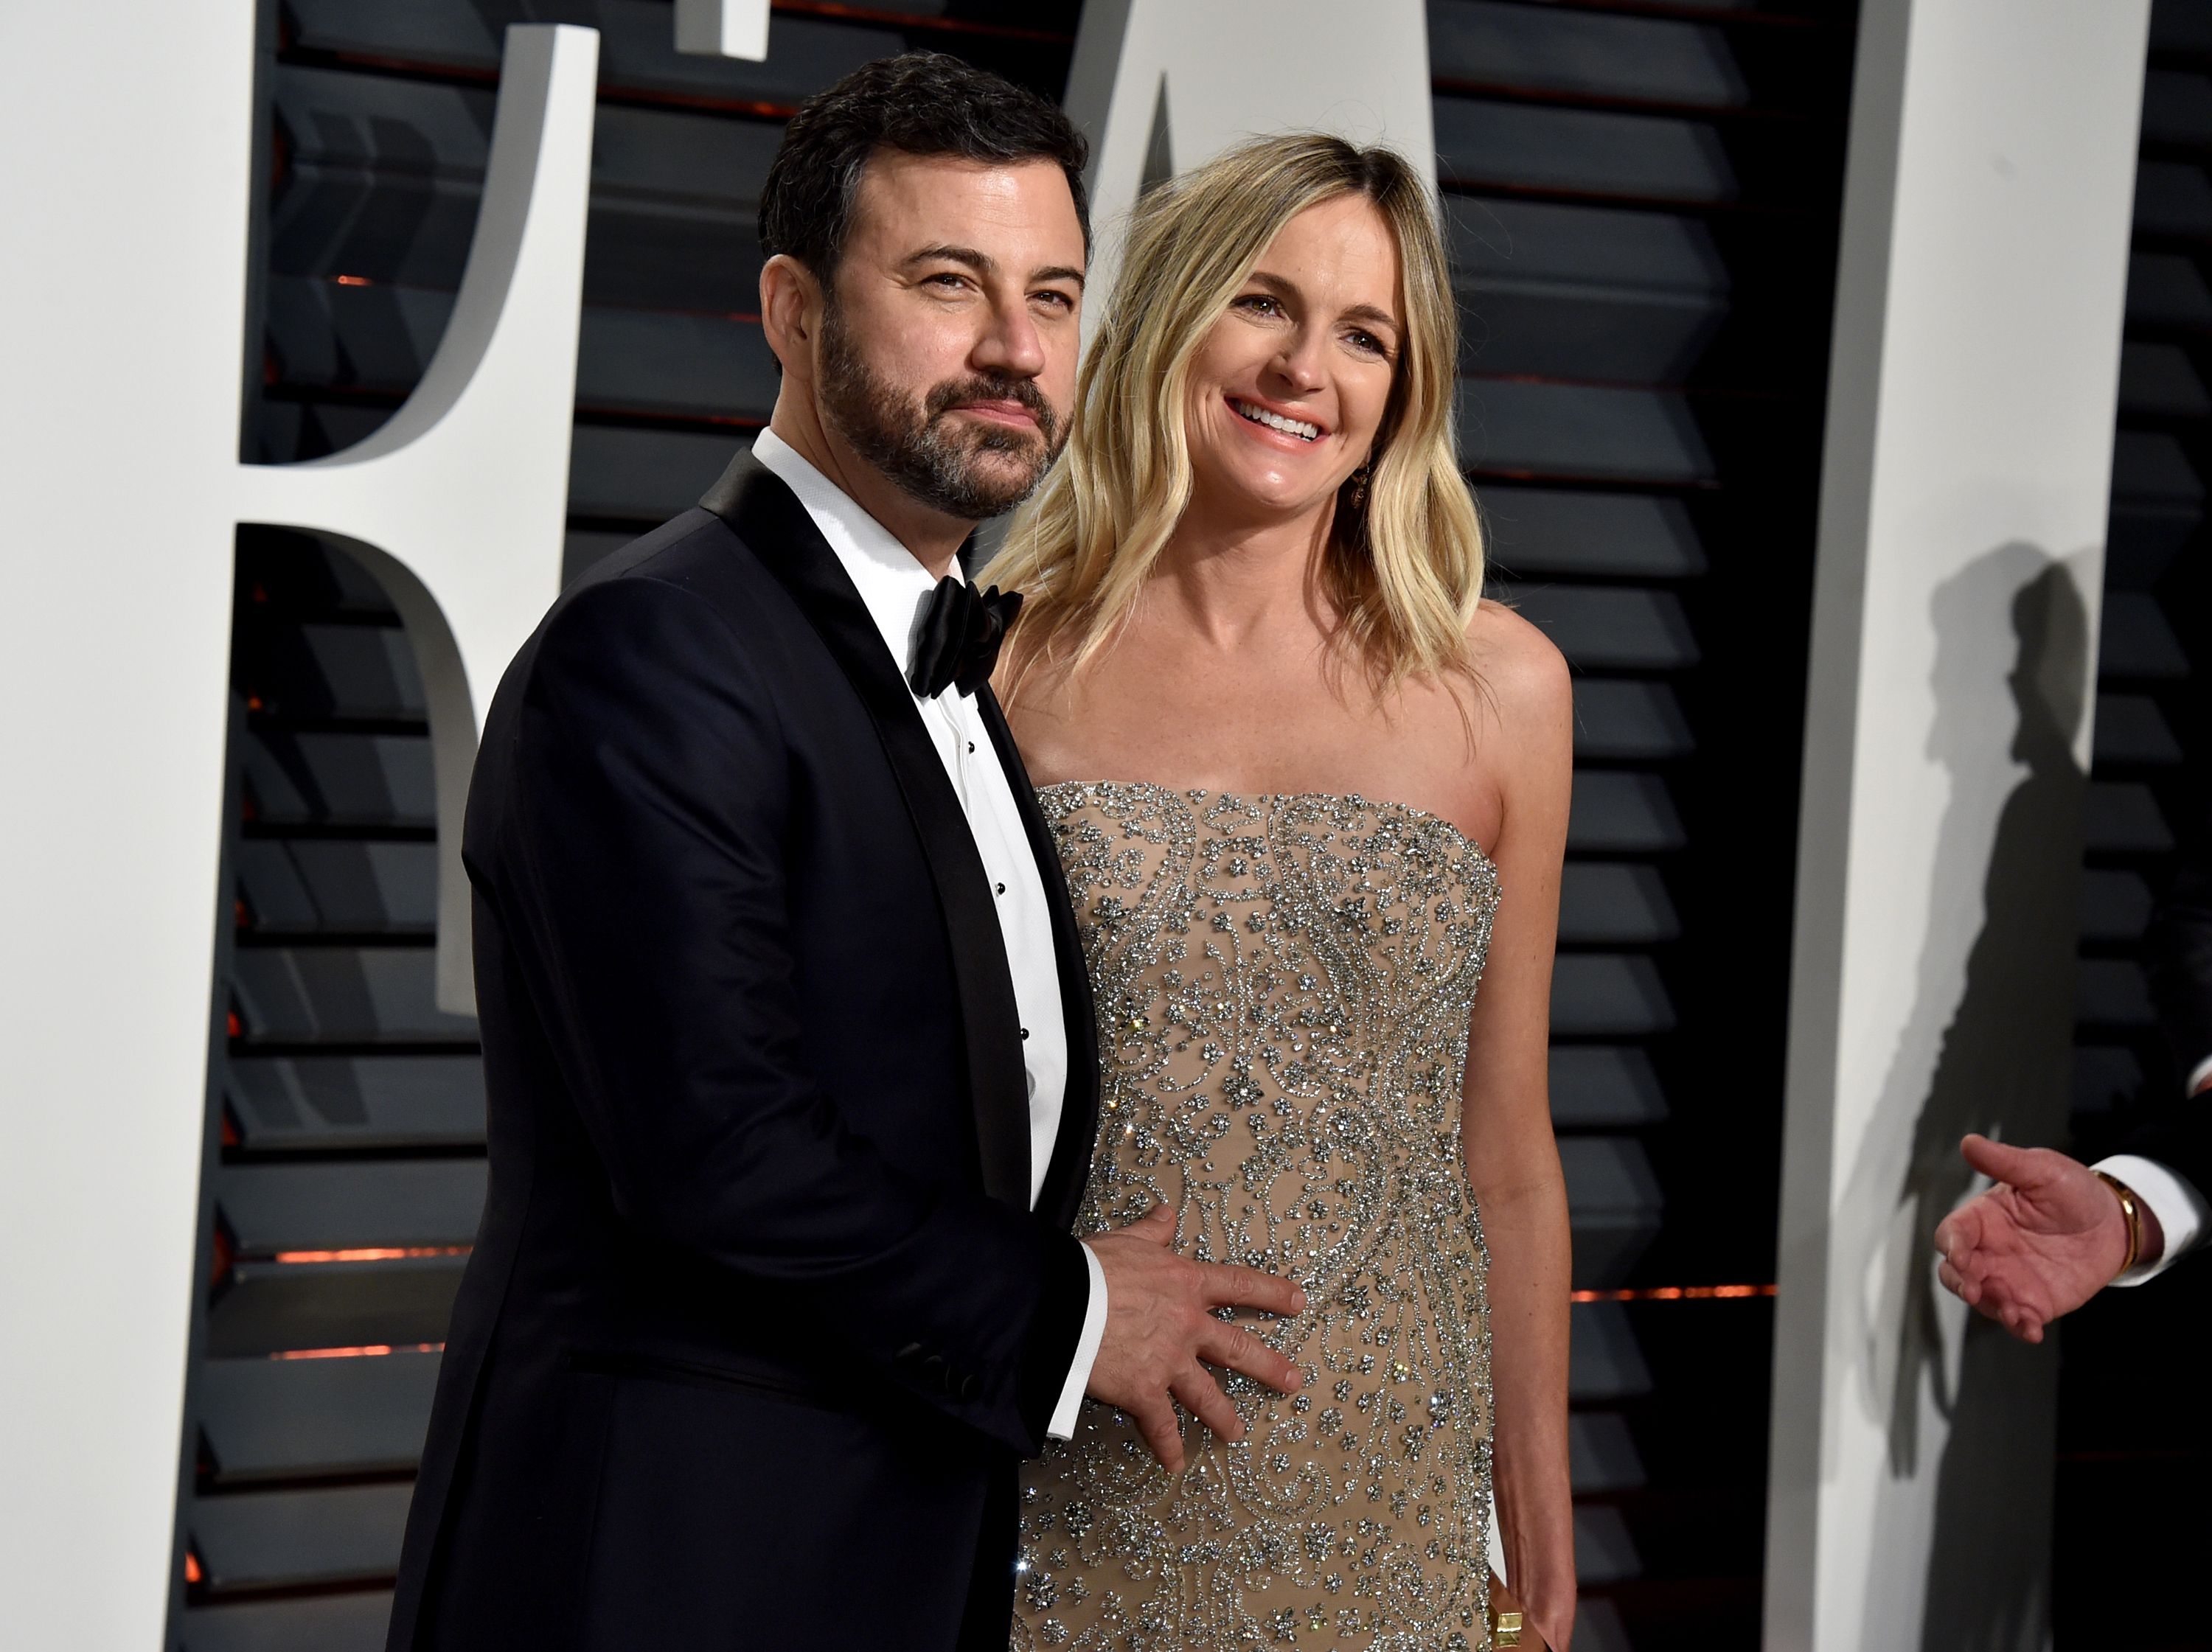 Jimmy Kimmel and Molly McNearney during the 2017 Vanity Fair Oscar Party hosted by Graydon Carter at Wallis Annenberg Center for the Performing Arts on February 26, 2017 in Beverly Hills, California. | Source: Getty Images